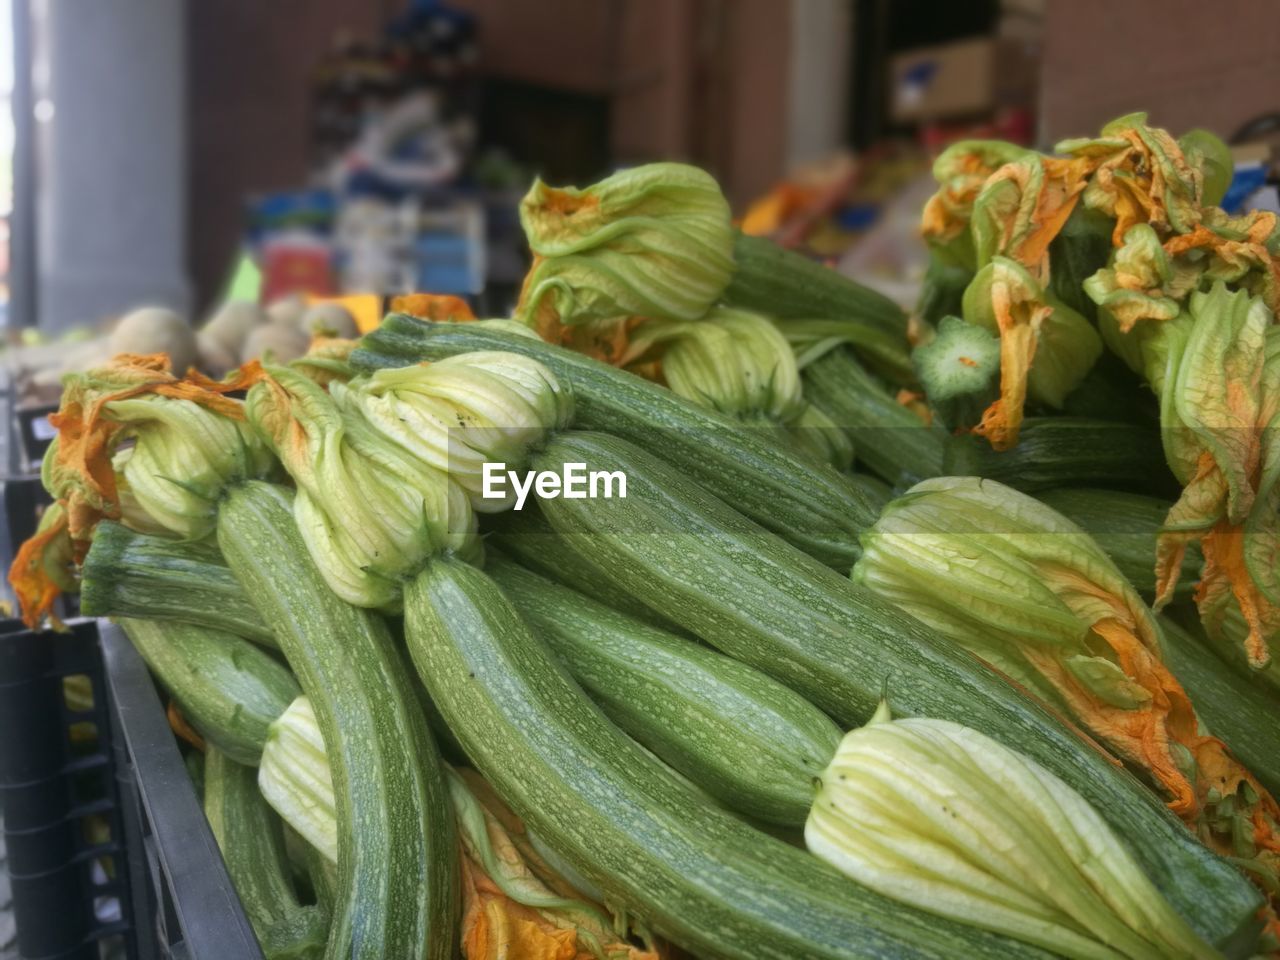 CLOSE-UP OF VEGETABLES FOR SALE IN MARKET STALL